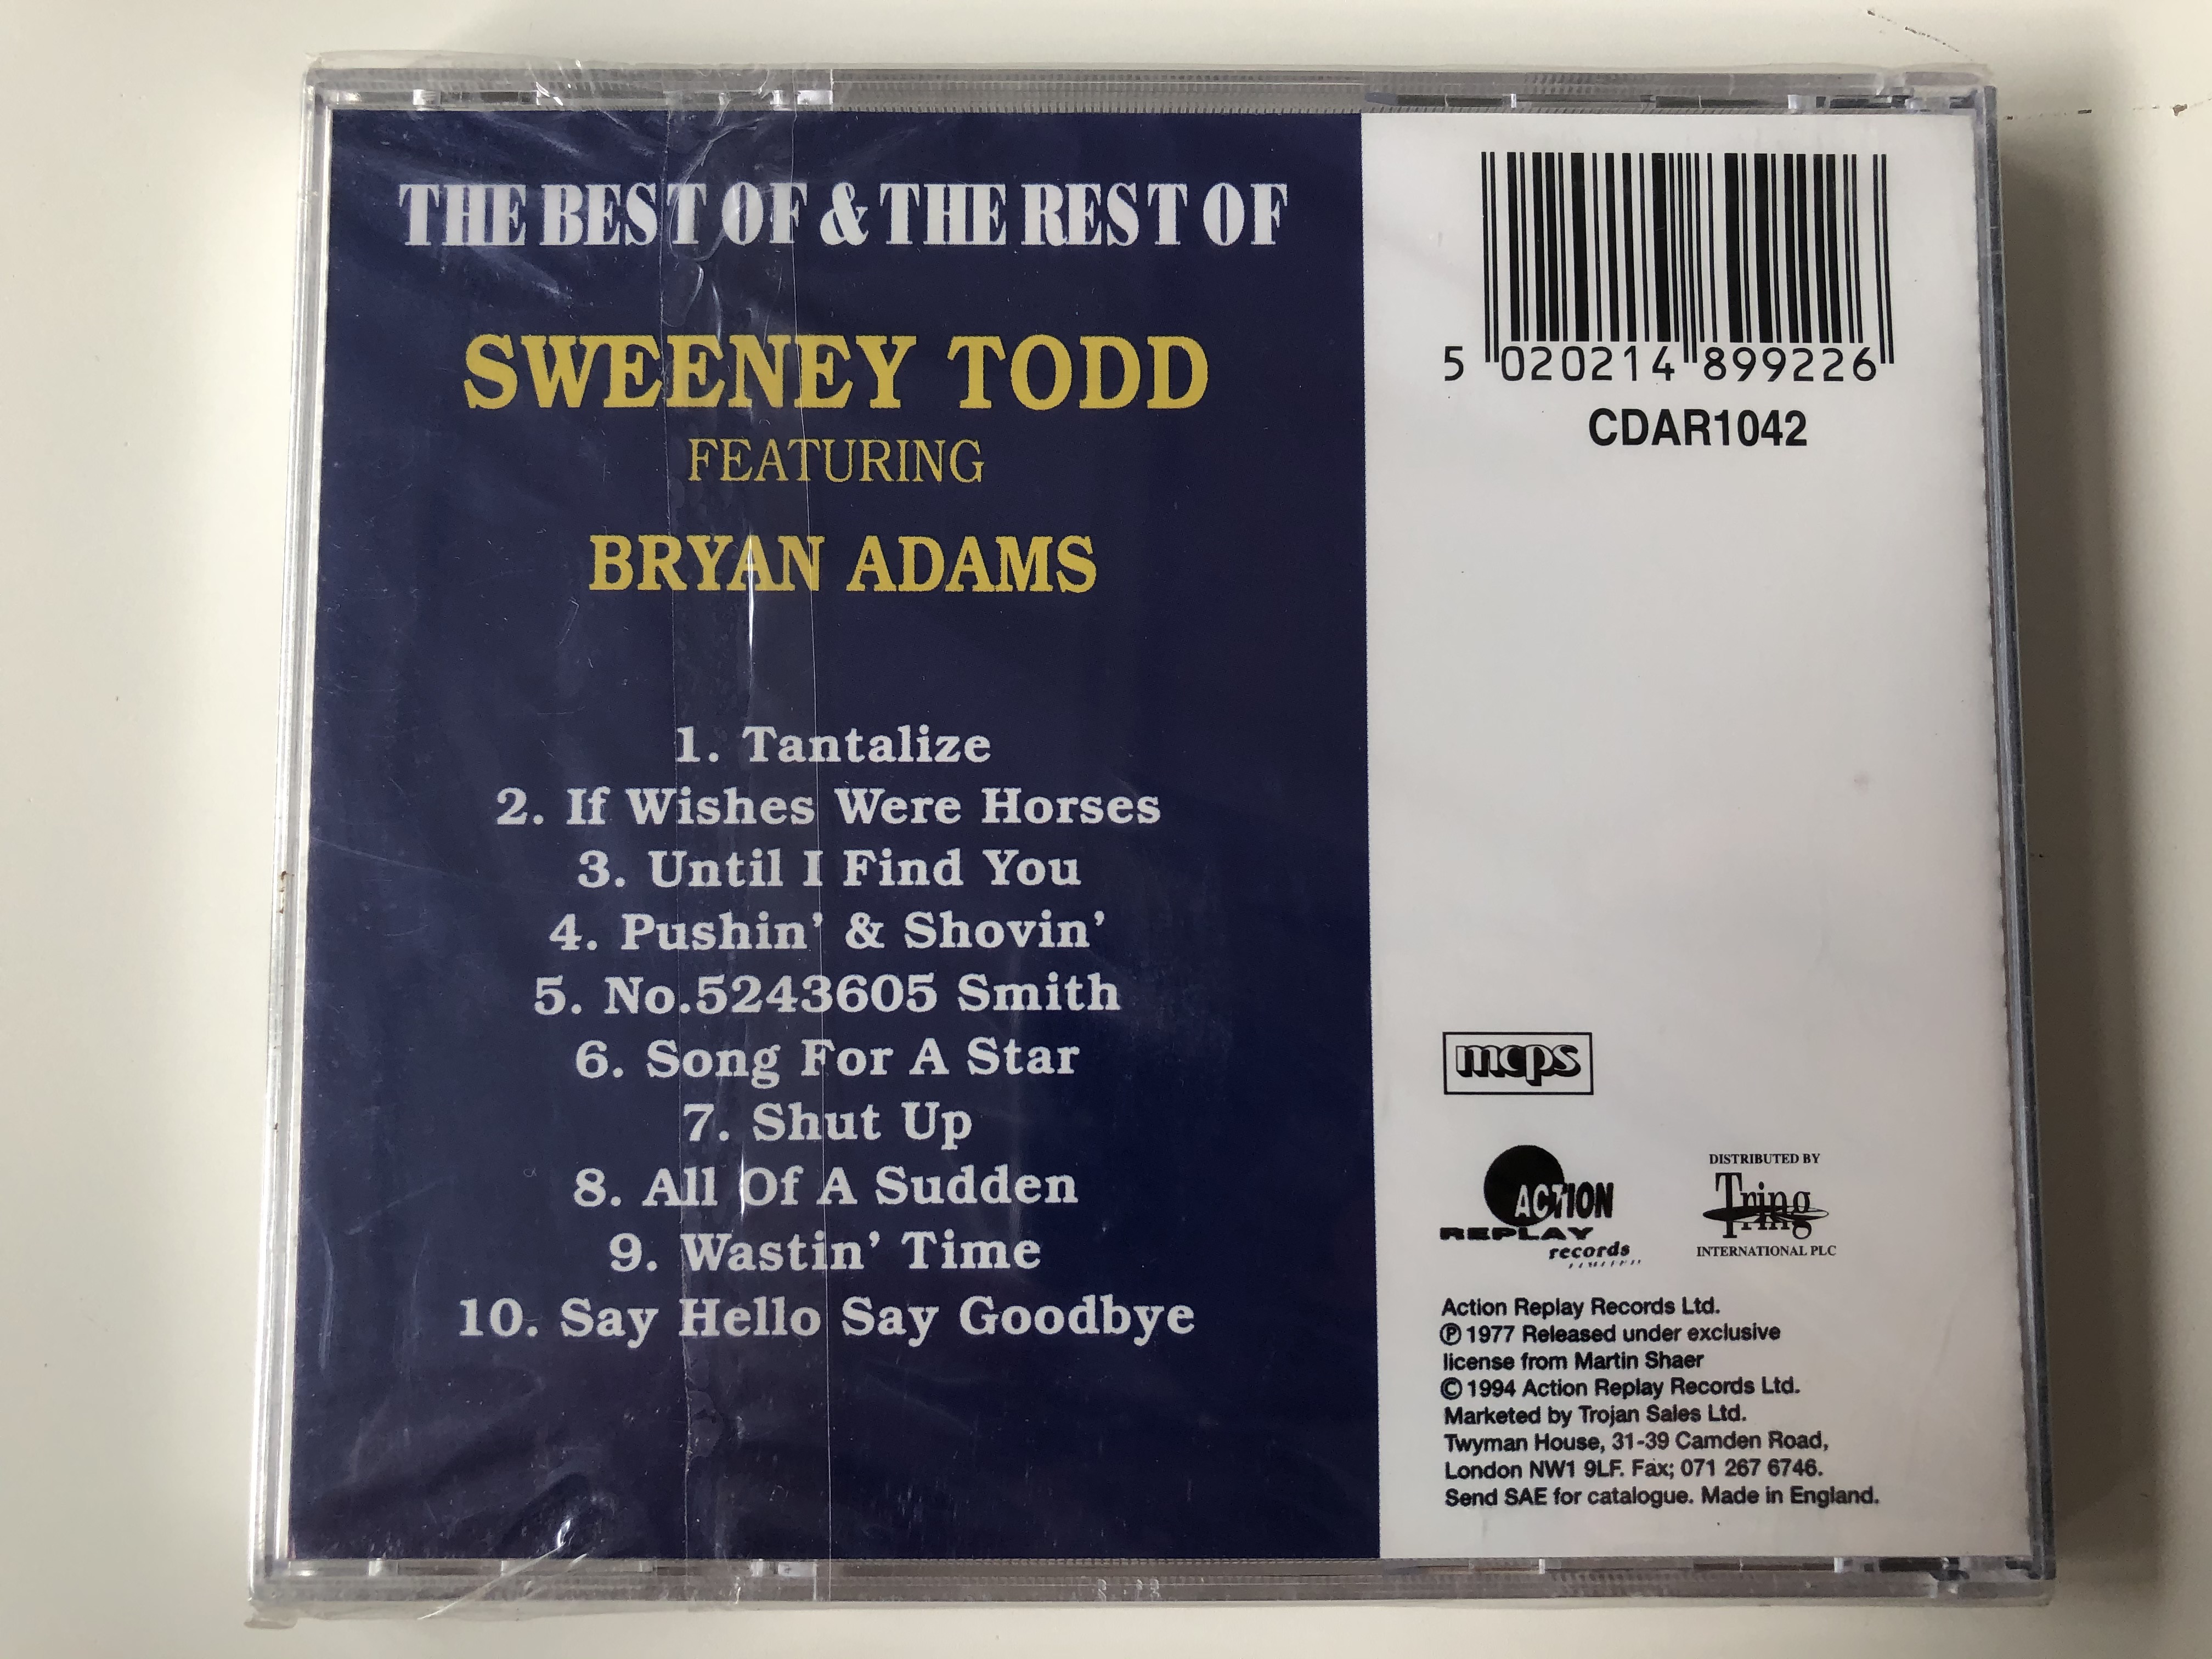 the-best-of-the-rest-of-sweeney-todd-featuring-bryan-adams-action-replay-records-audio-cd-1994-cdar1042-2-.jpg